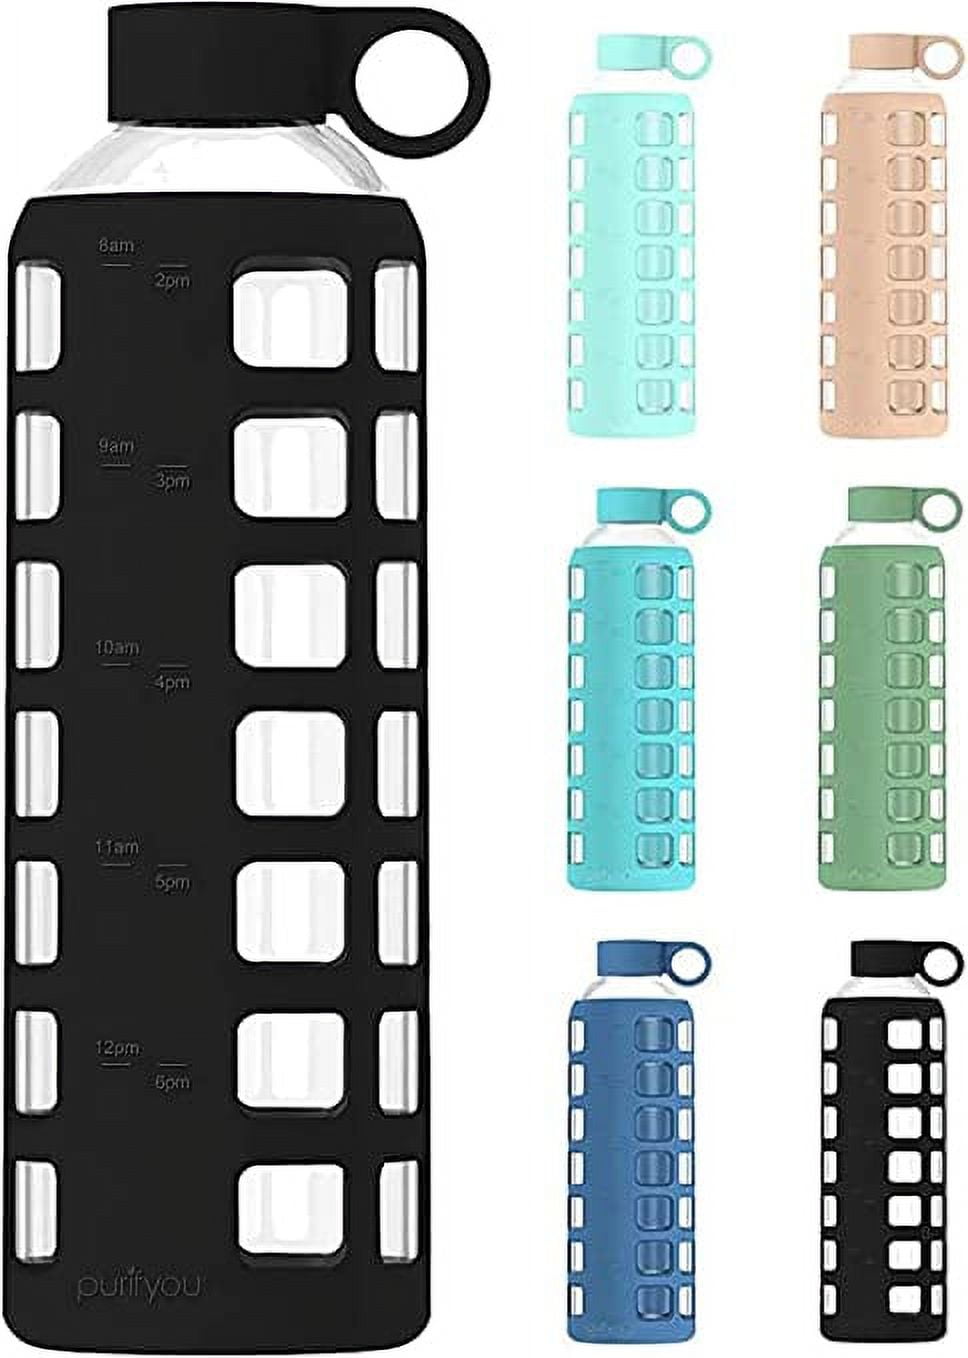 Silicone Glass Water Bottle Sleeves - 6-Pack of Protective Holders 16-18 oz  Capacity - Anti-Slip Protection for Beverage Containers - Insulating